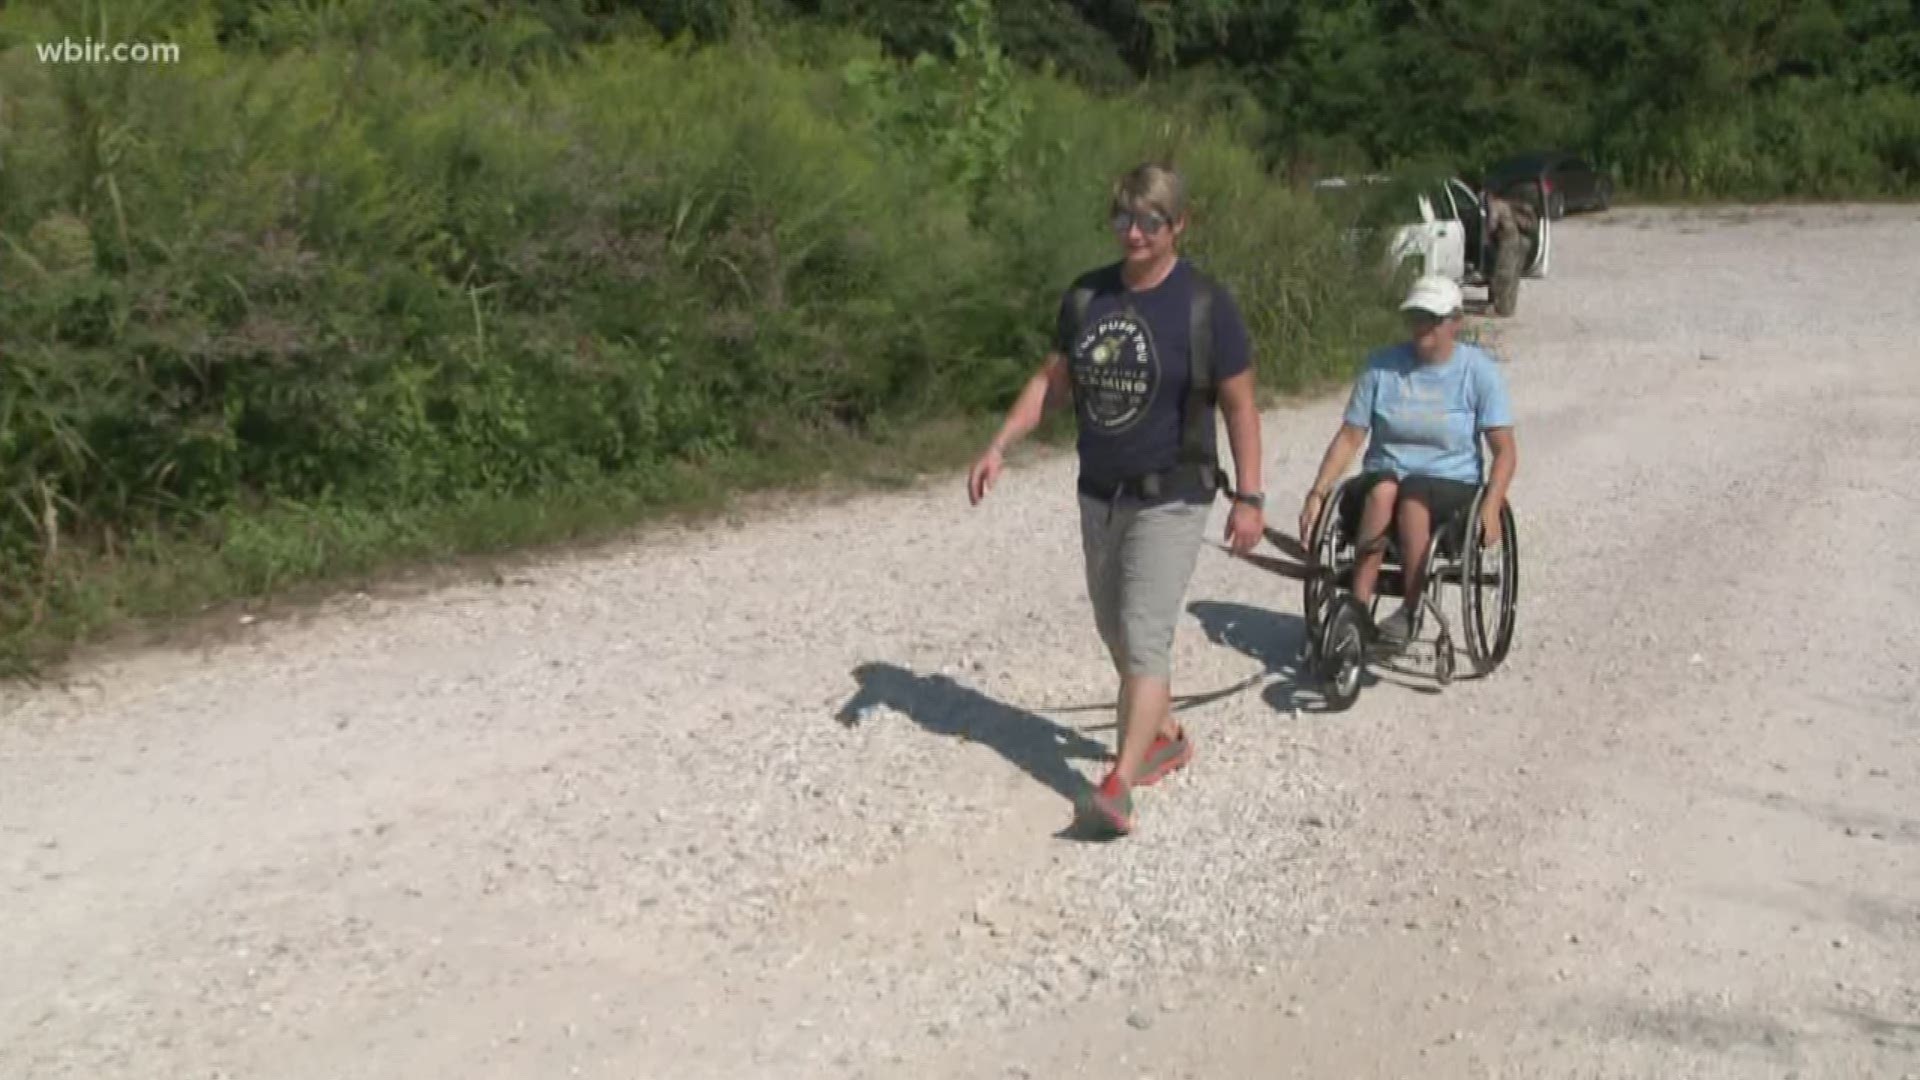 For centuries, pilgrims have walked the "Camino de Santiago," sometimes called "The Way of Saint James" or just "The Way." Some East Tennesseans will start that journey later this month -- on wheels. They are part of a group including people in wheelchairs and people who will push them. Sept. 9, 2019-4pm.